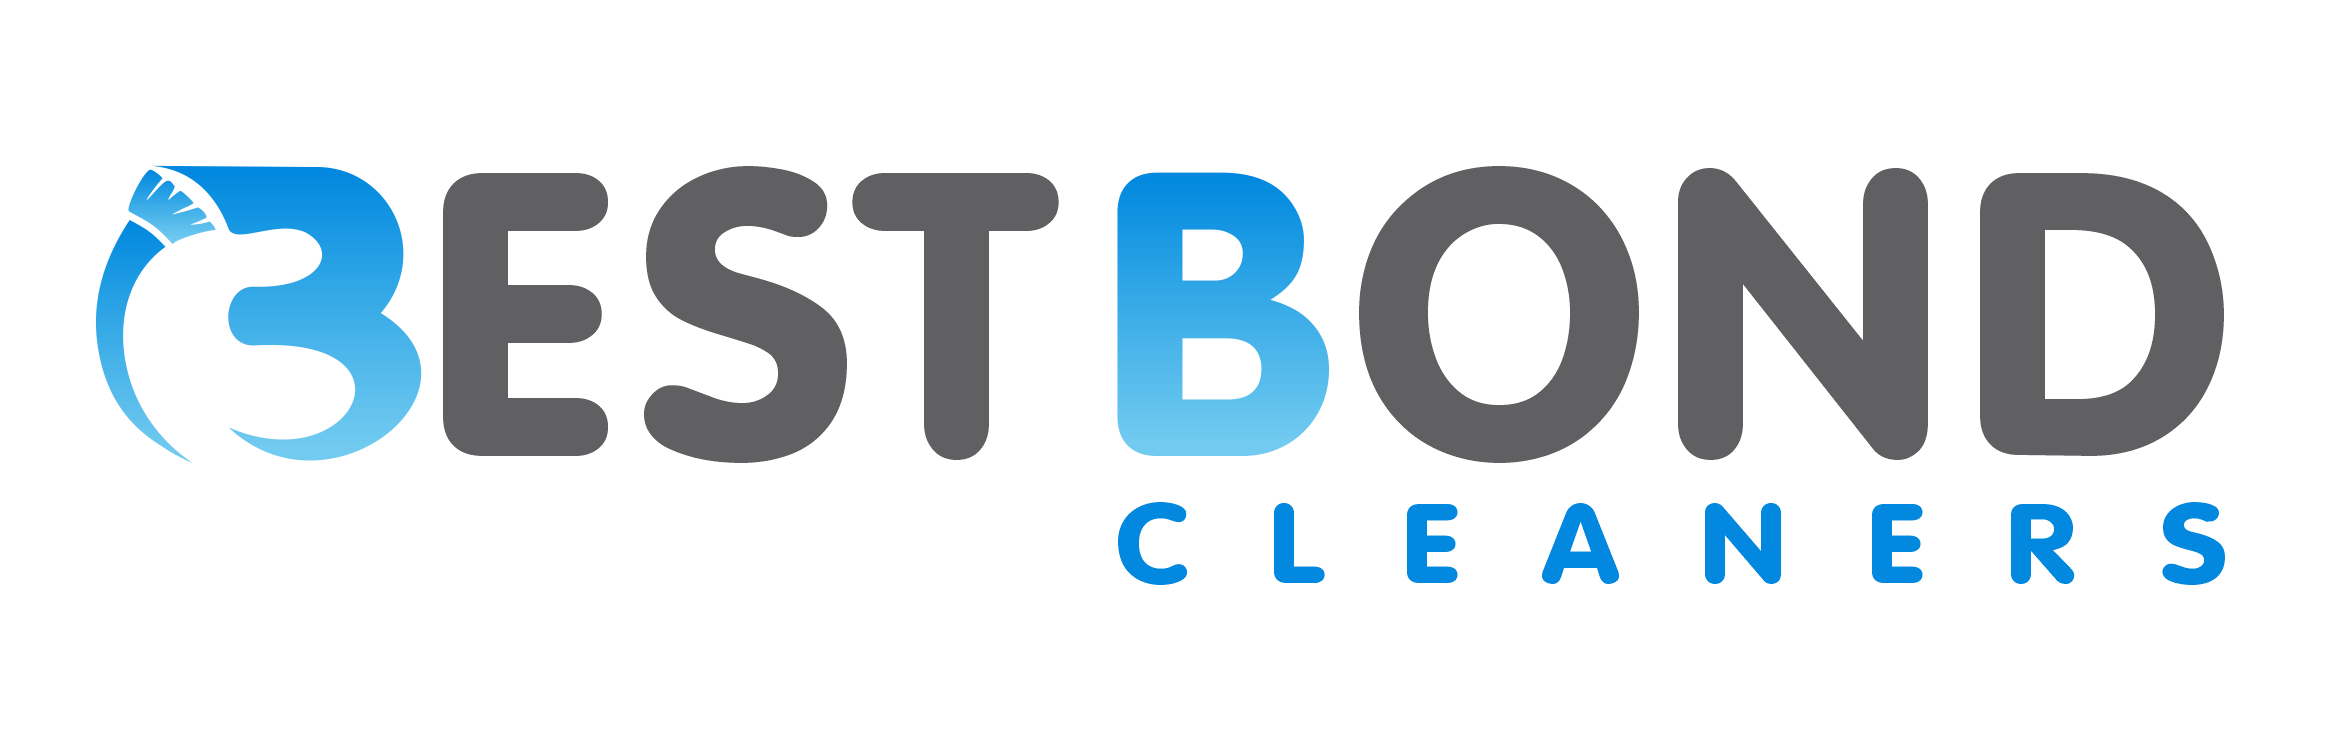 Best Bond Cleaners Brisbane- End Of Lease Cleaning